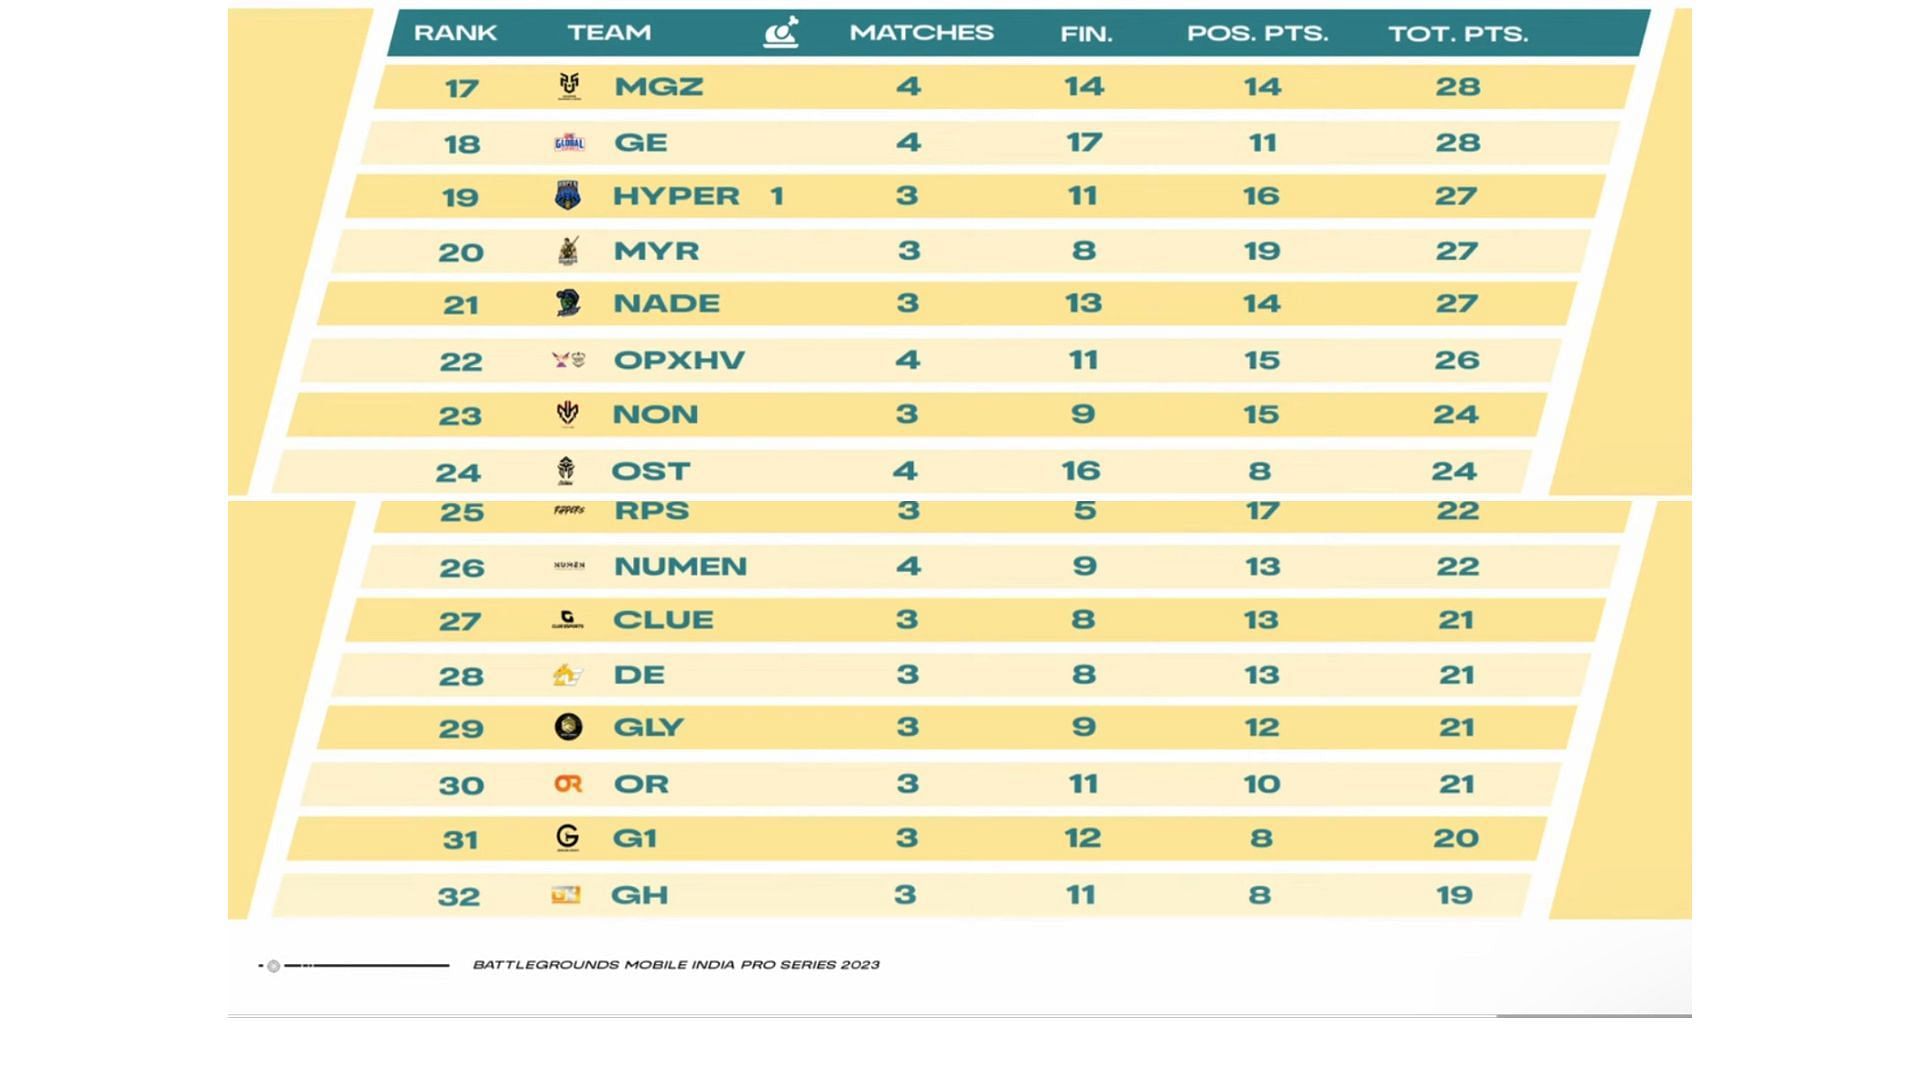 Global Esports ranked 18th after four games (Image via Sportskeeda)